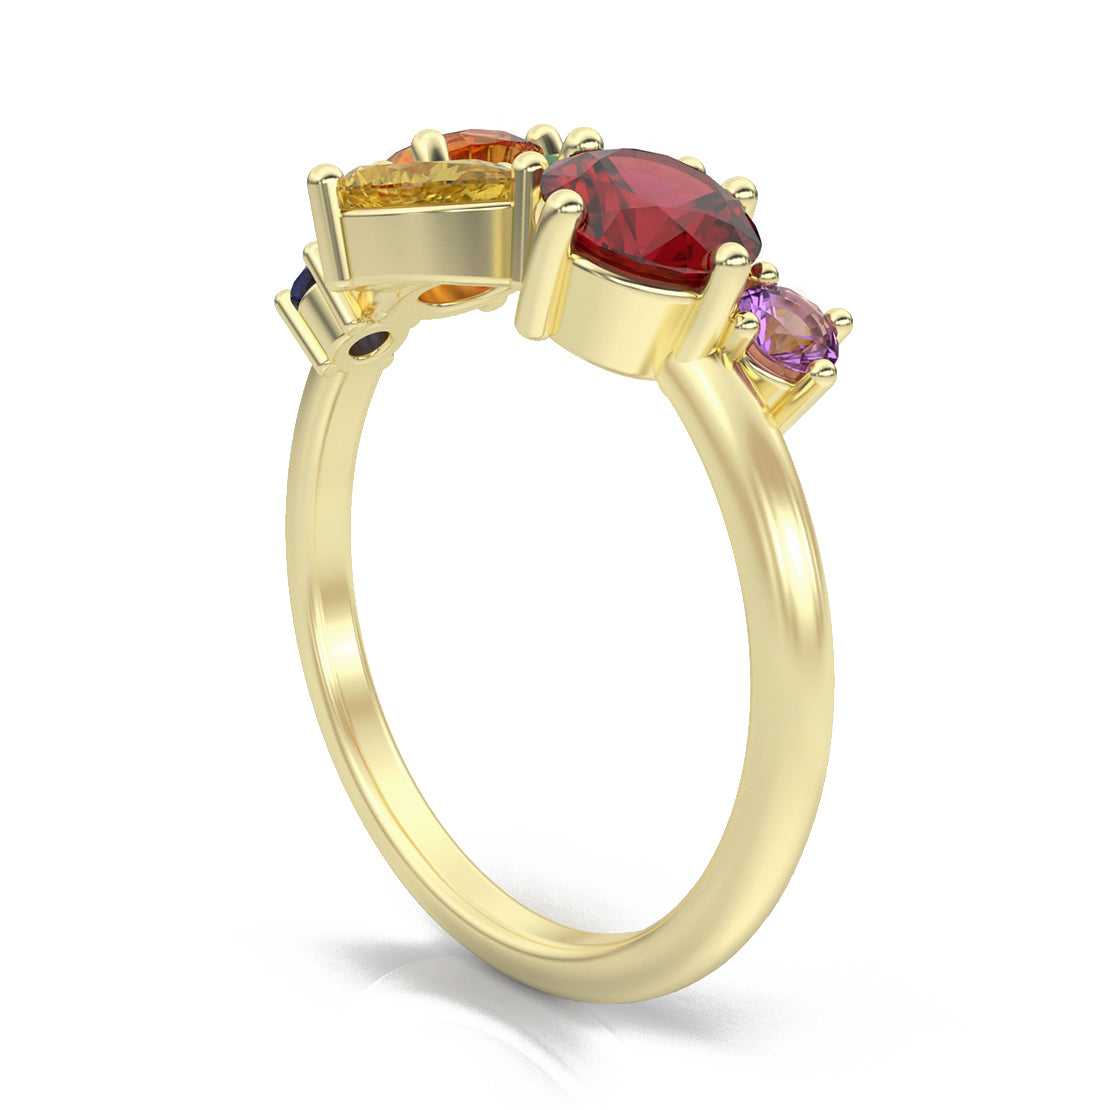 Pride Cluster Ring in 14k Yellow Gold